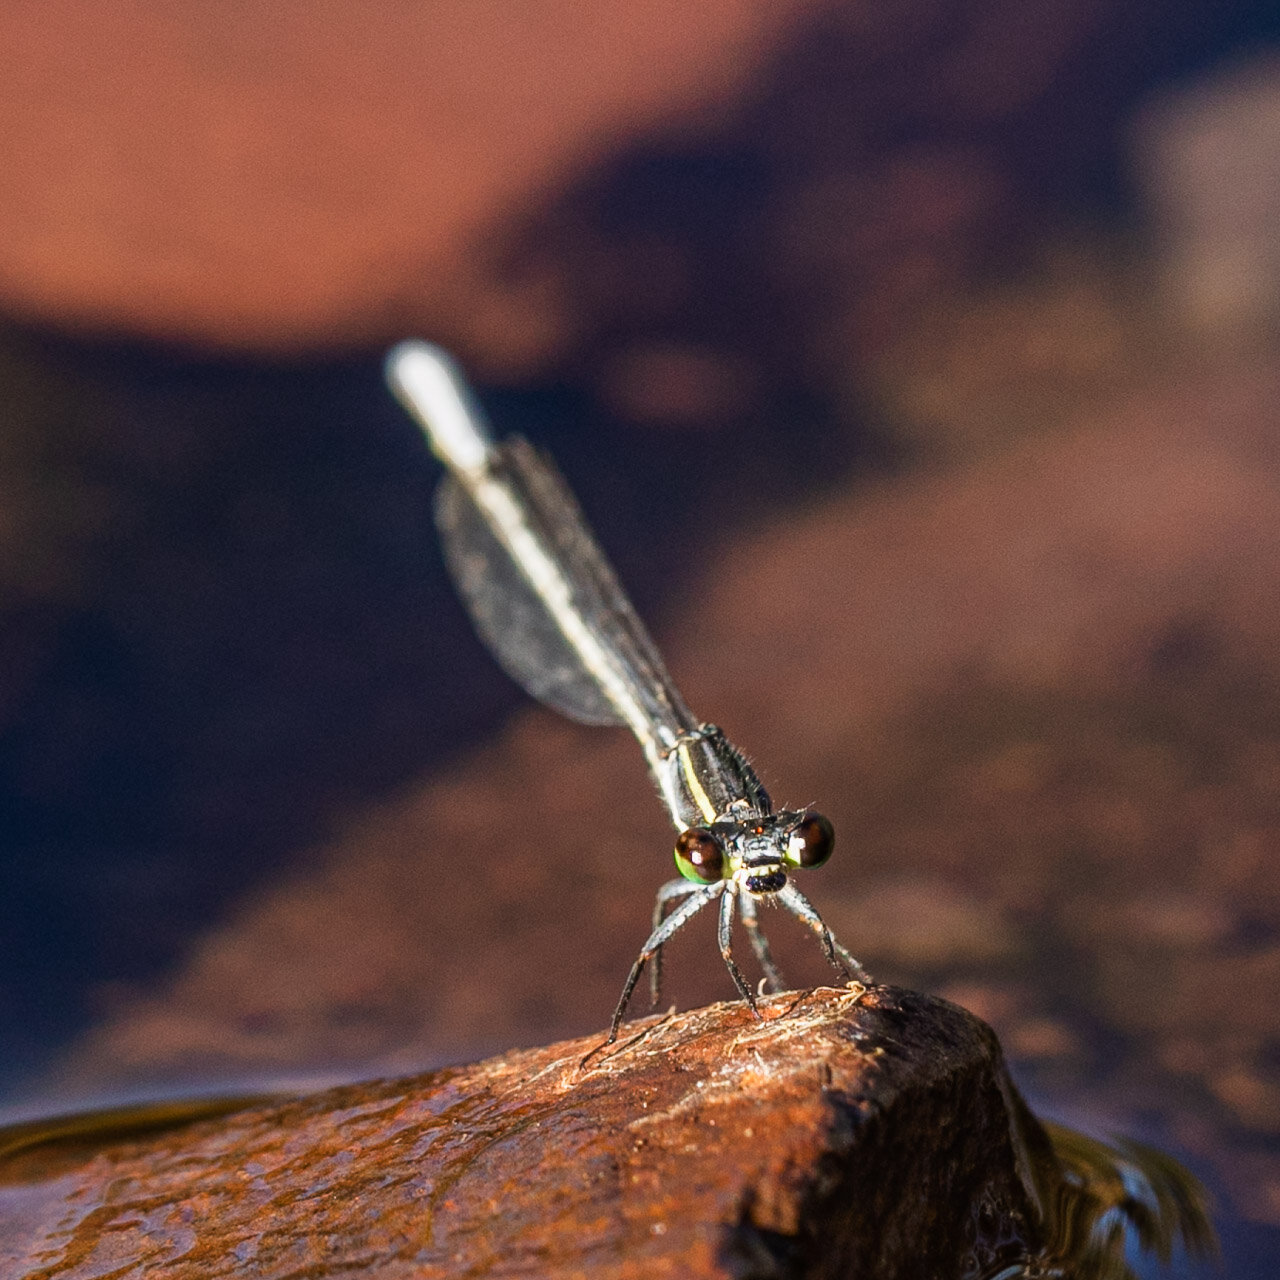 A dragonfly resting on a rock in the Pilbara